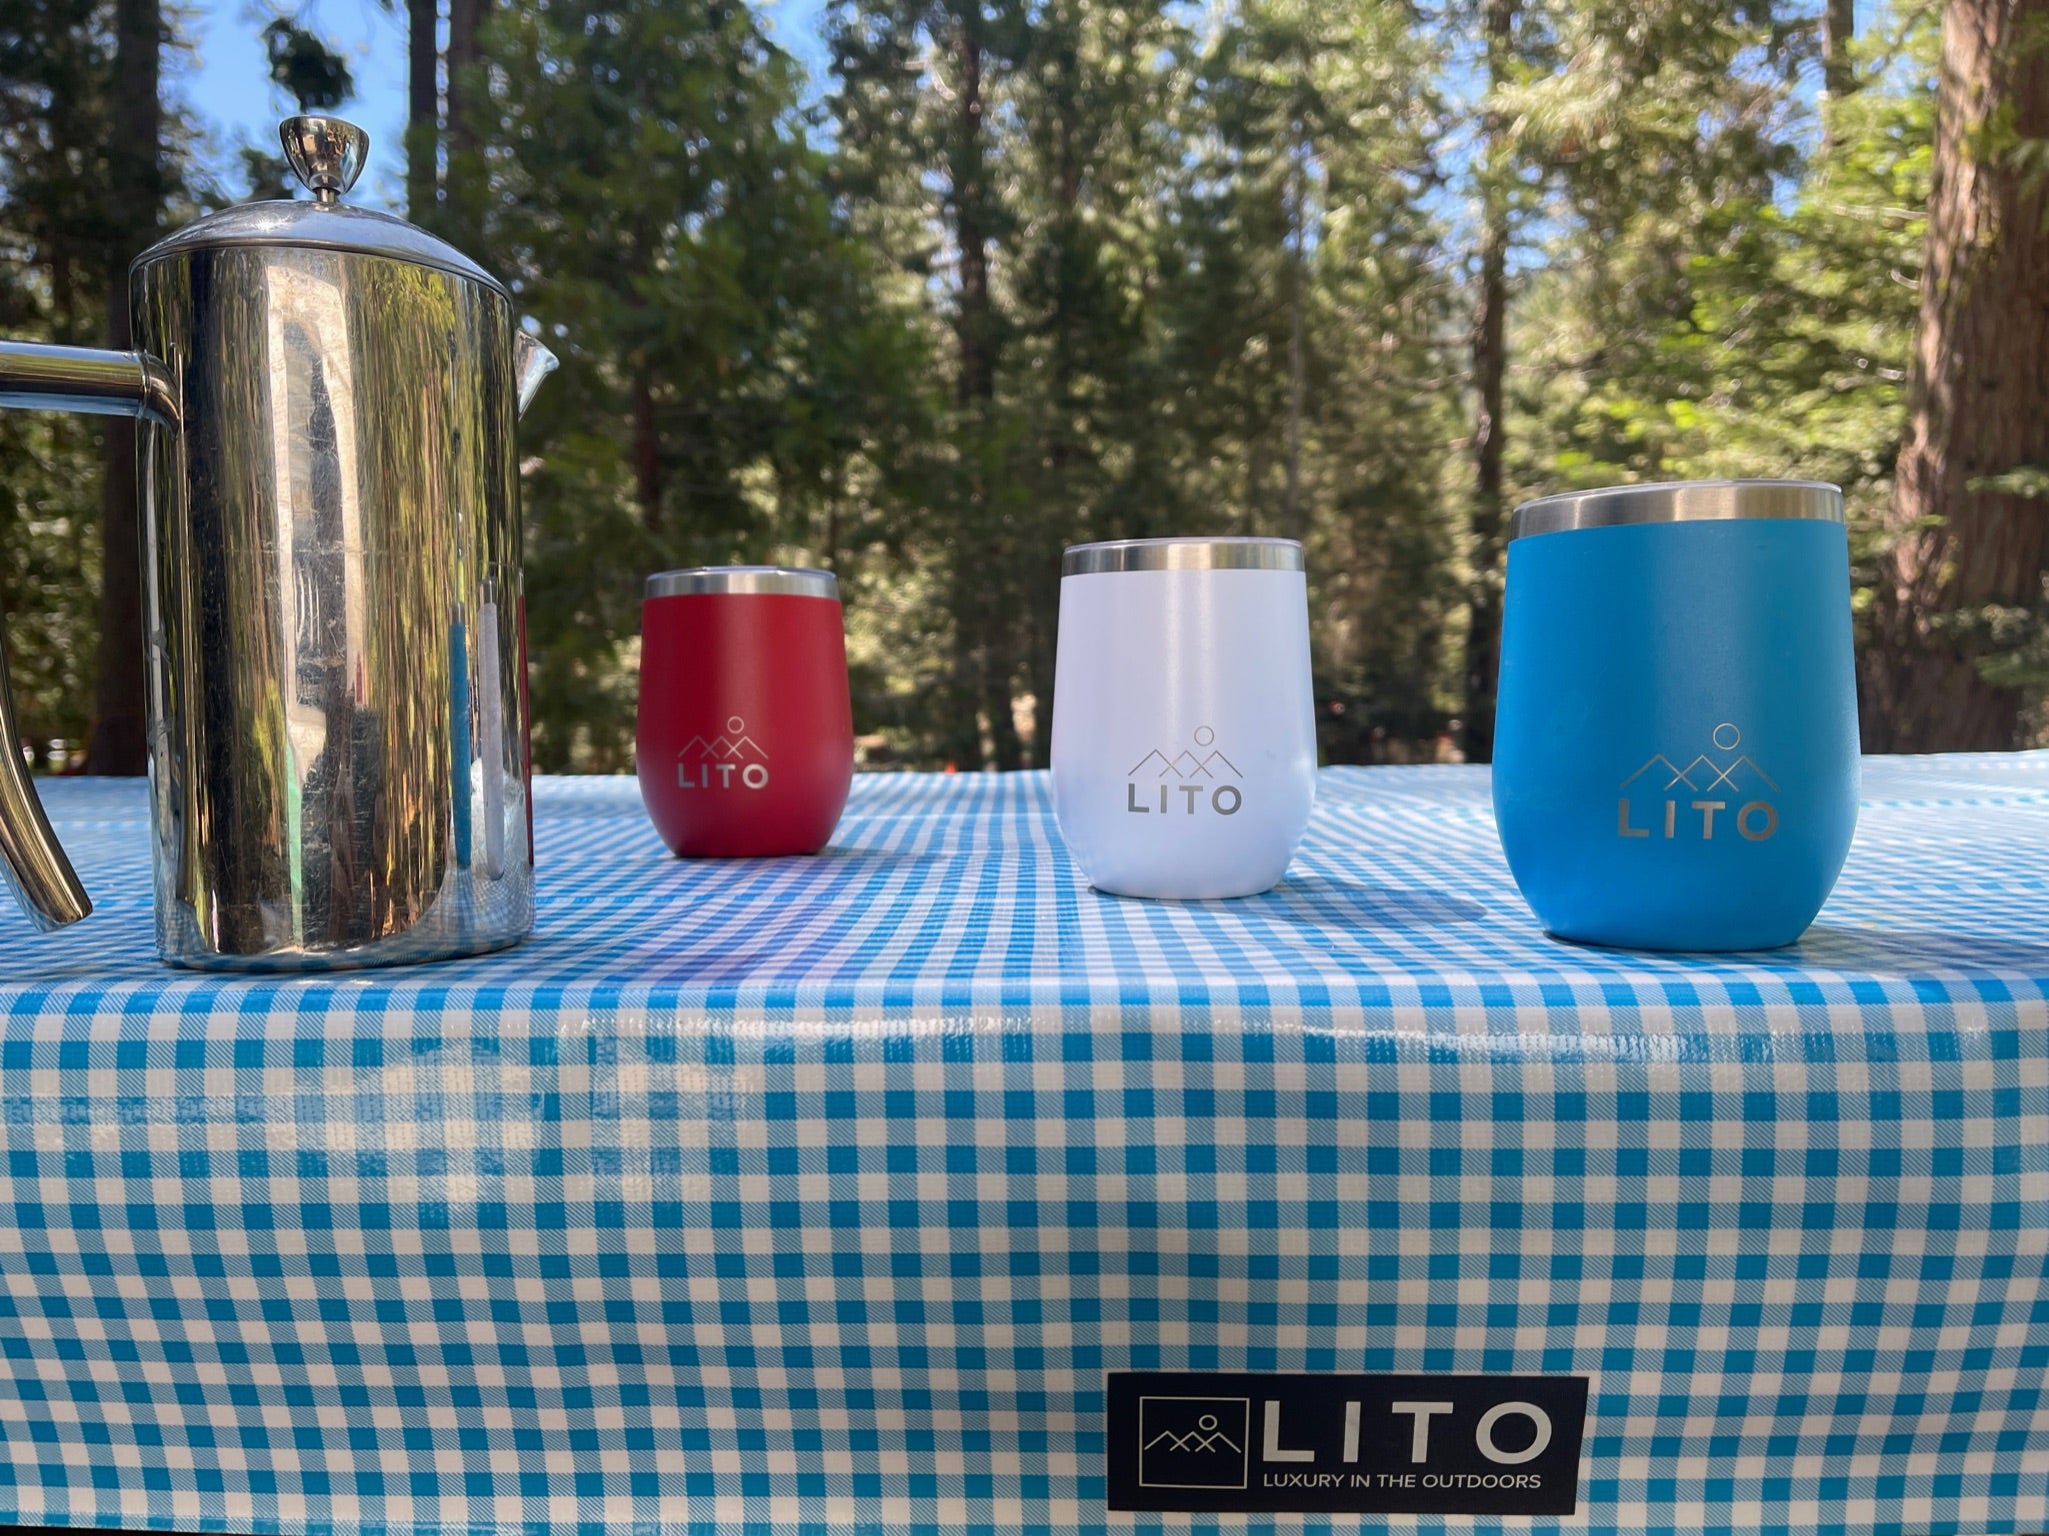 Why Buy a LITO Wine Tumbler... Cause It's Rated # 1